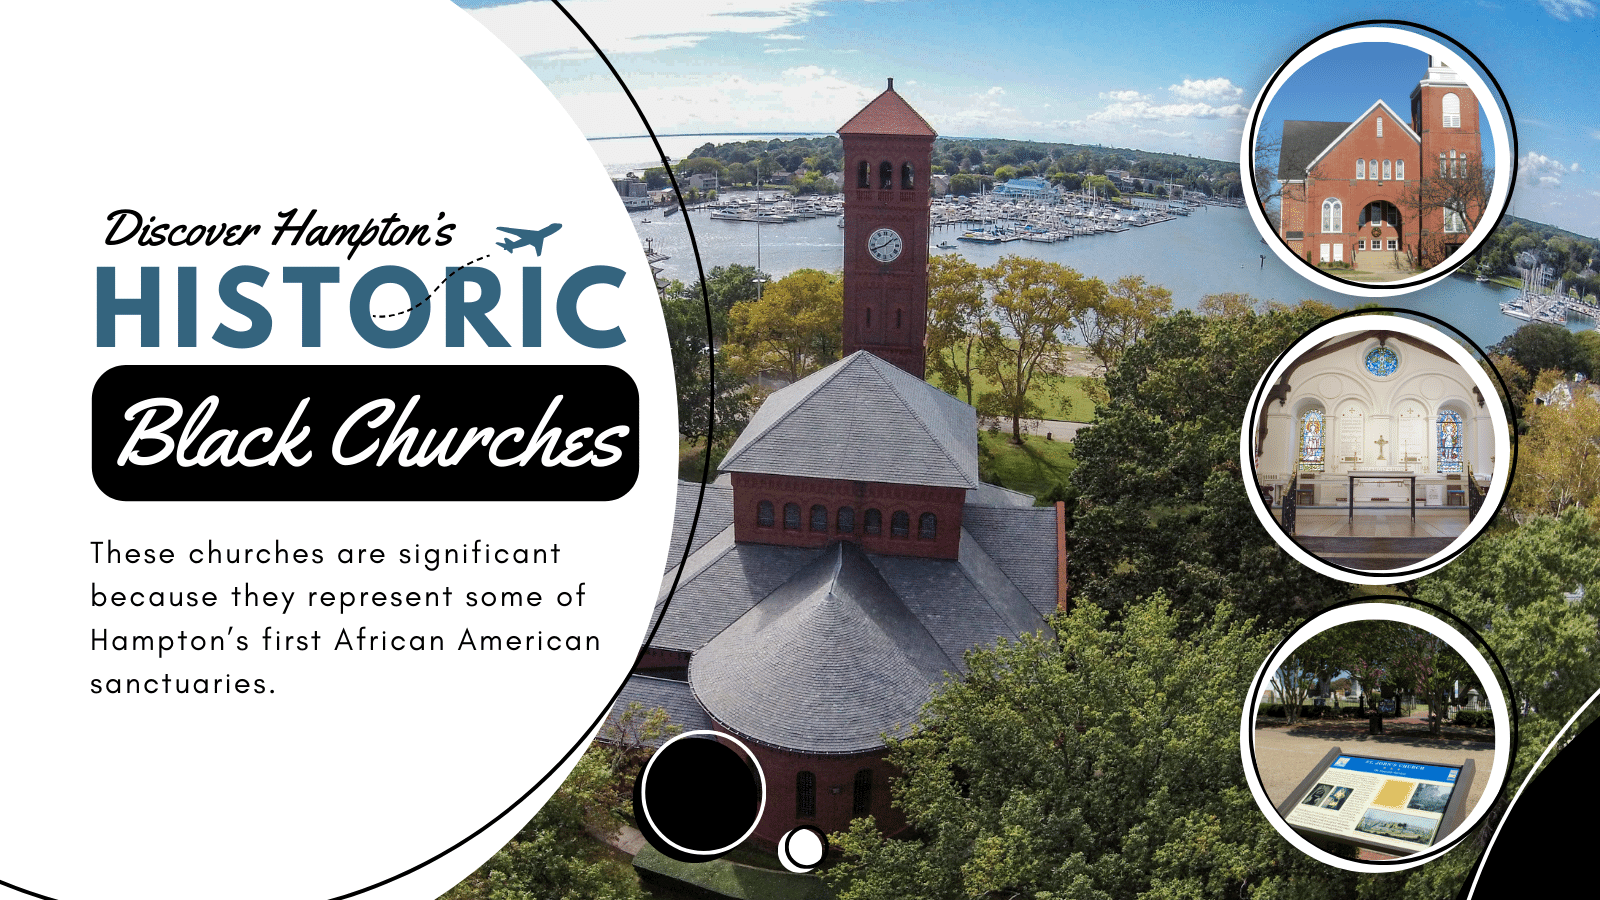 Discover Hampton's Historic Black Churches. These churches are significant because they represent some of Hampton’s first African American sanctuaries.